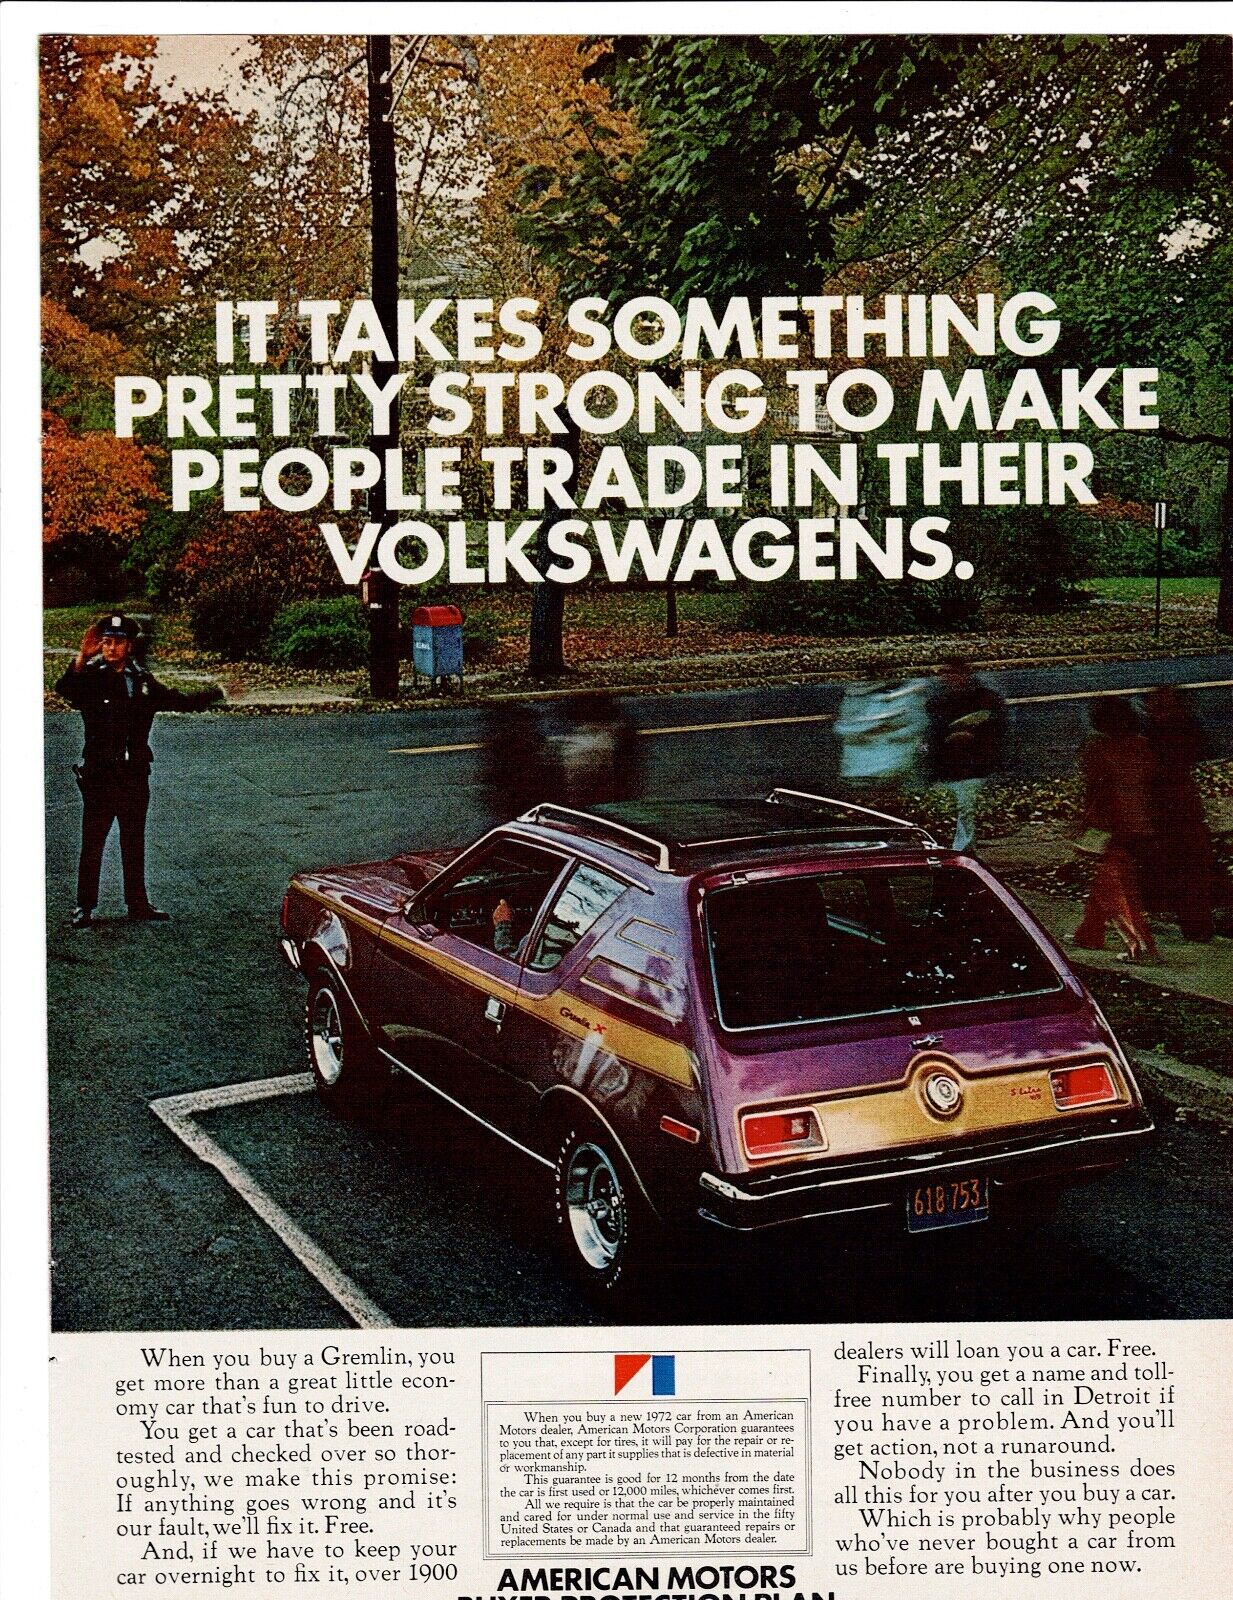 Purple 1972 AMC GREMLIN Car Print Ad ~ Something Strong People Trade in VW